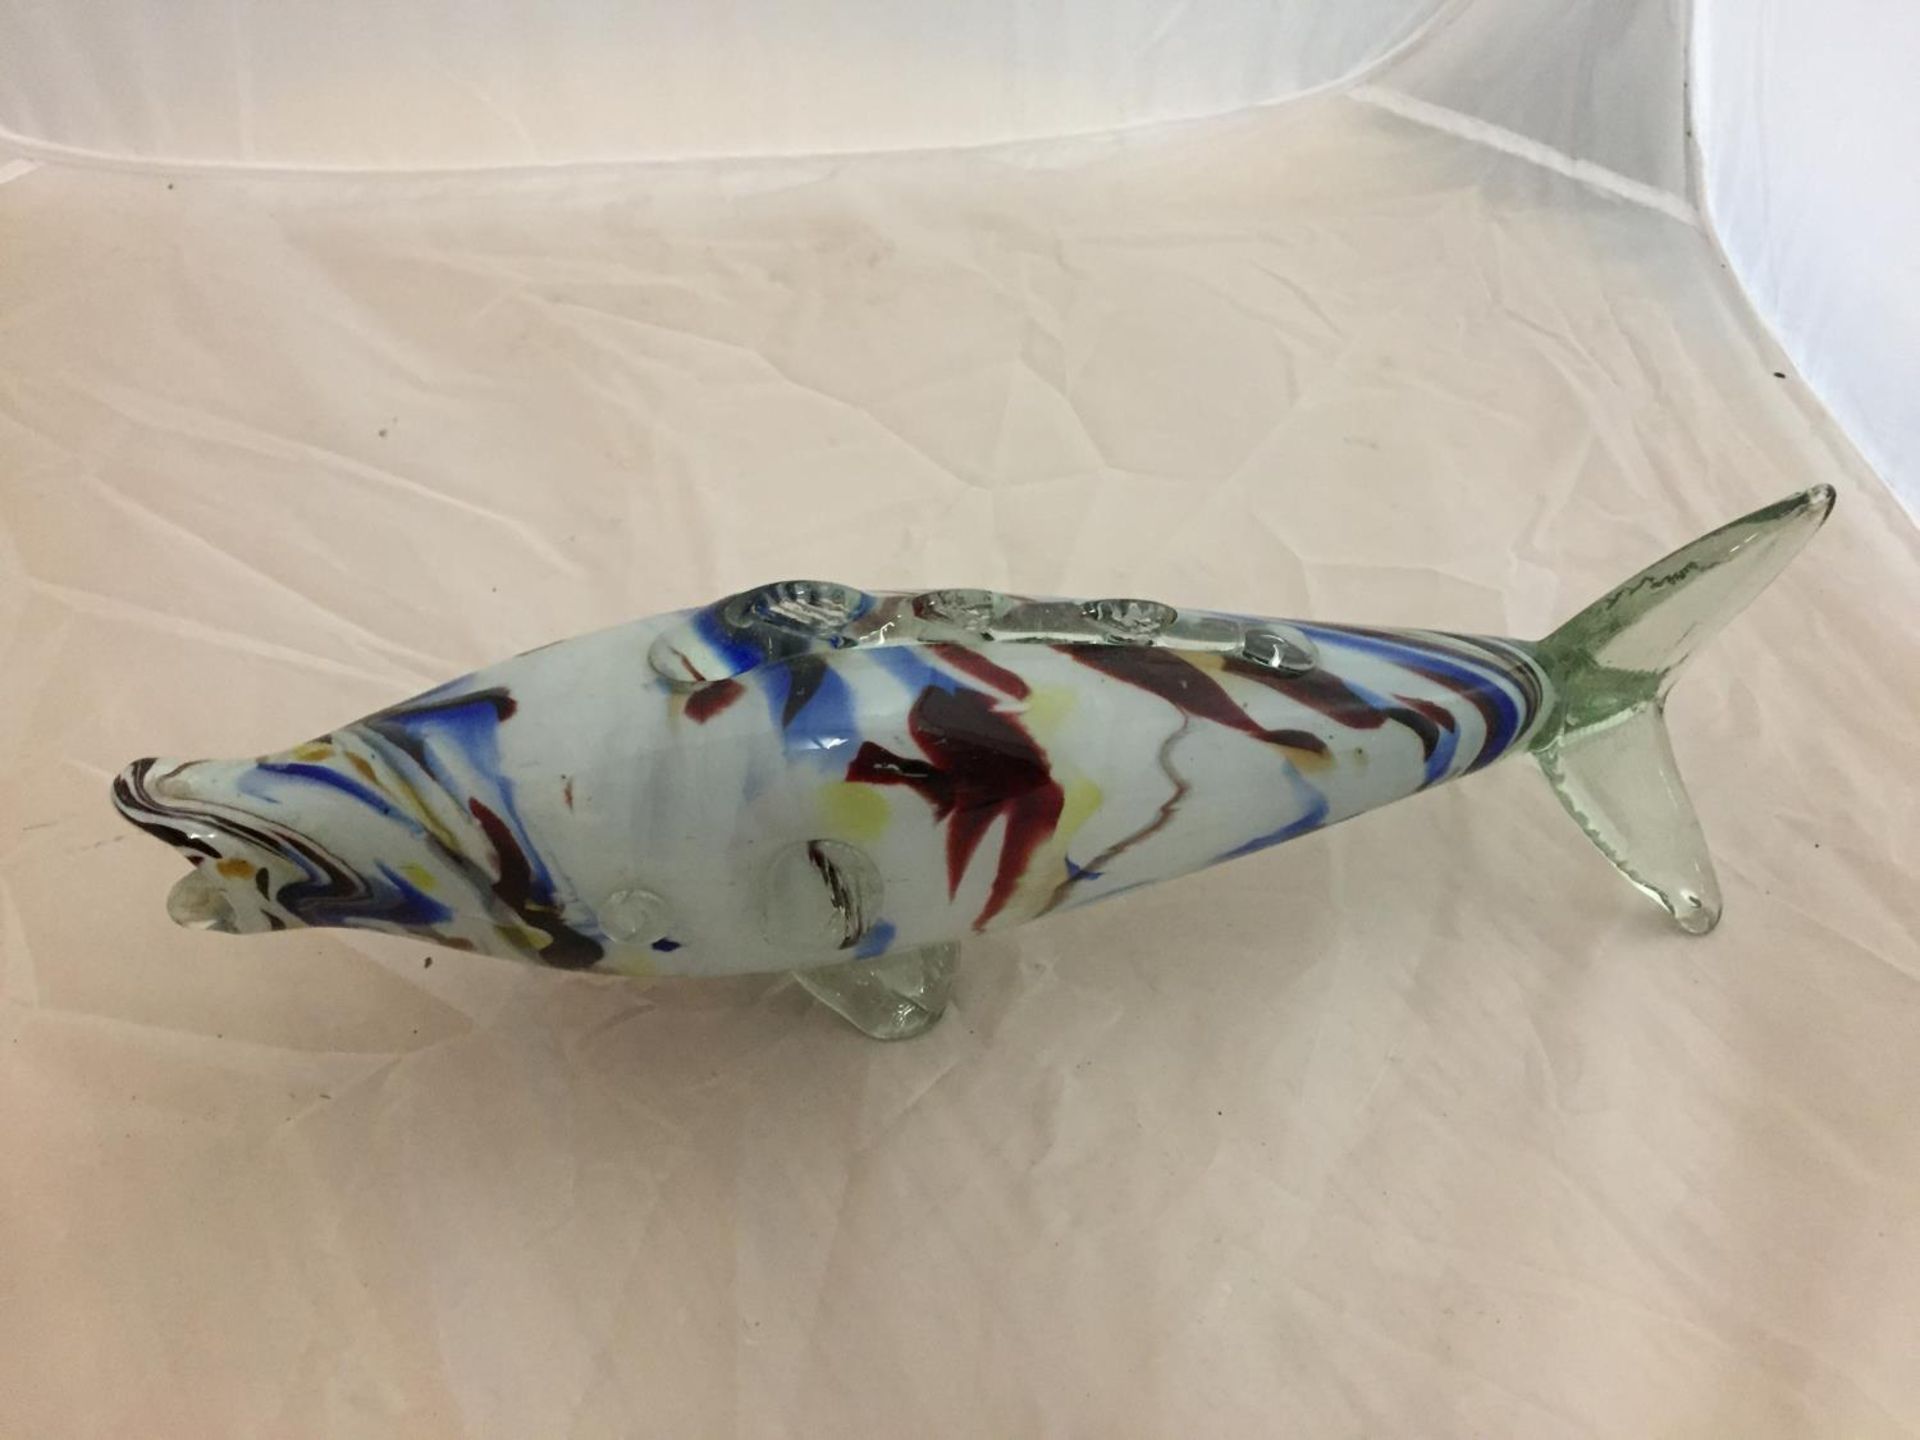 A VINTAGE MURANO GLASS FISH - L:39.5CM - Image 3 of 3